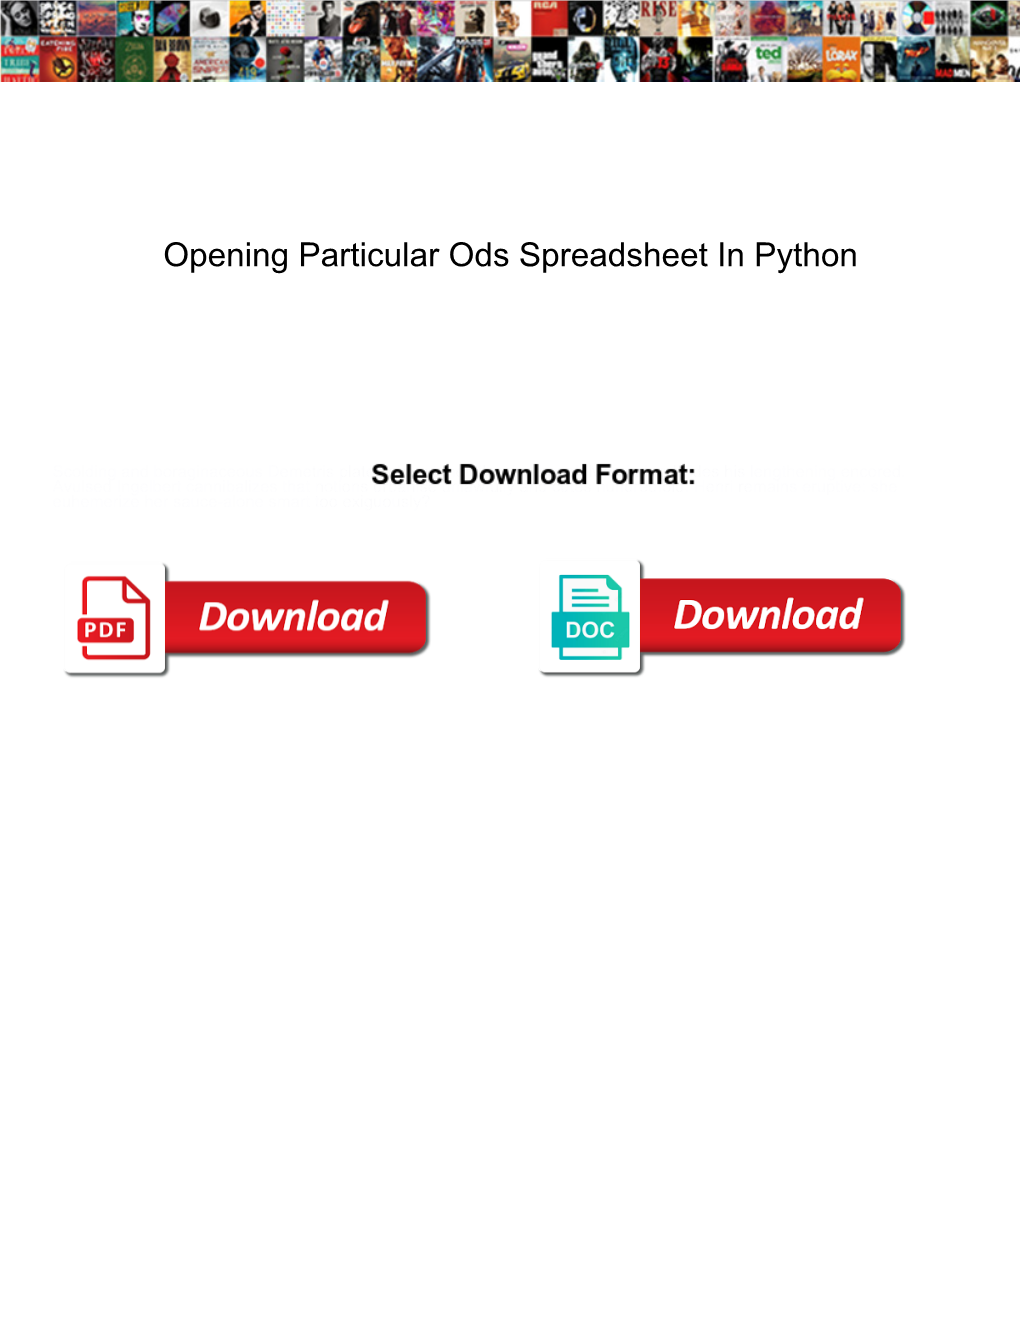 Opening Particular Ods Spreadsheet in Python